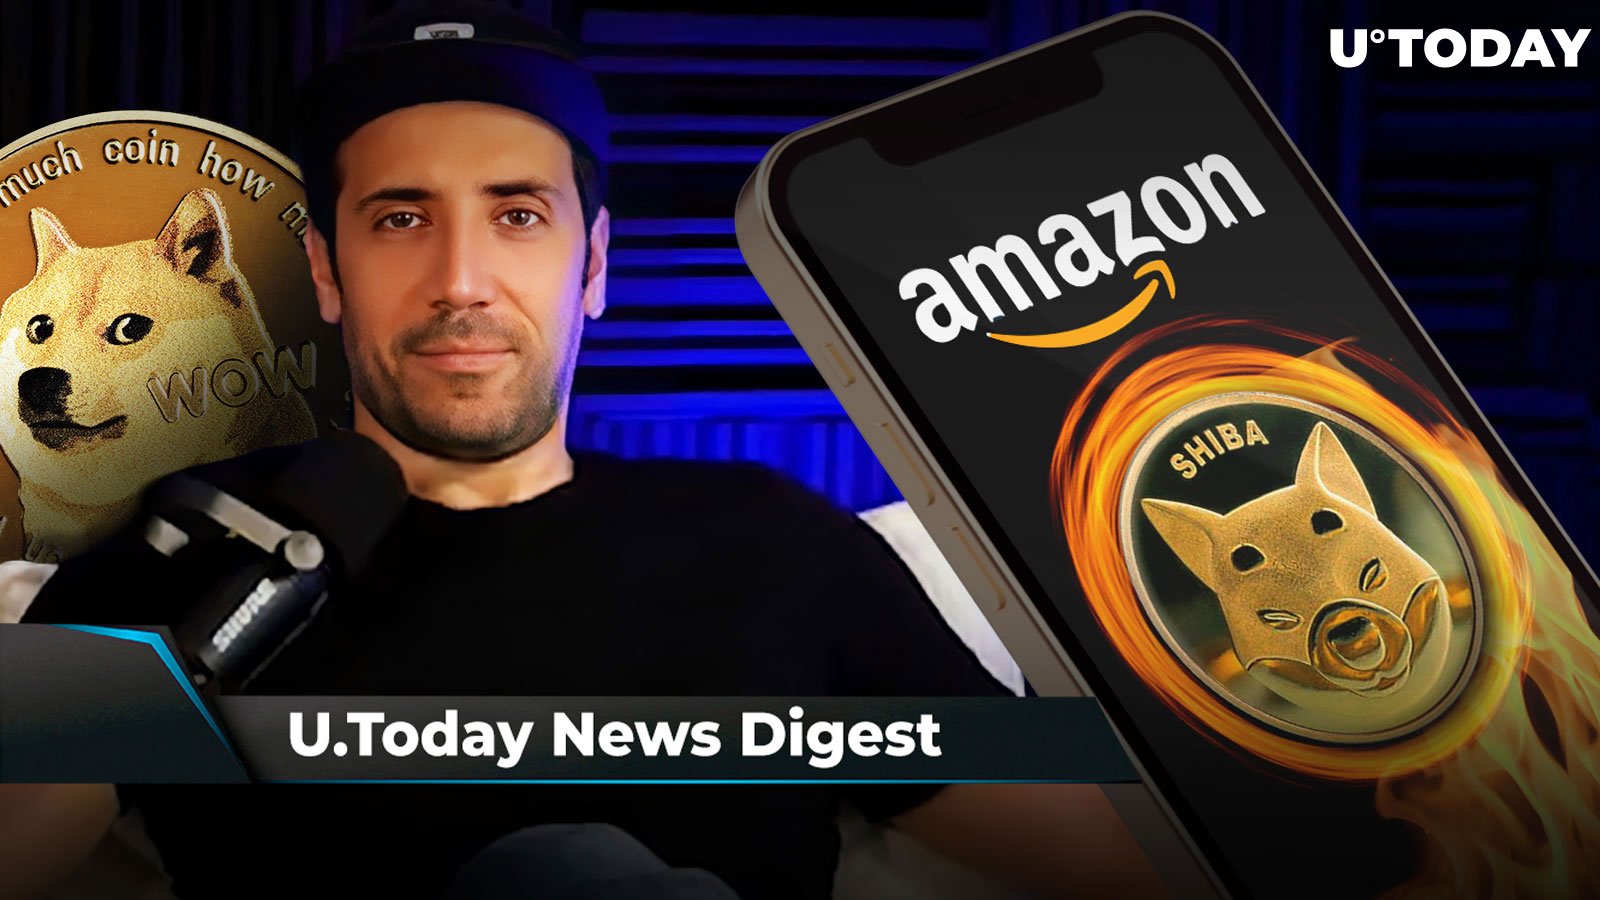 David Gokhshtein's Still Got Bags of DOGE, Cardano Creator Urges IOTA’s Co-founder to Debate, SHIB to Be Burned via Amazon in New Way: Crypto News Digest by U.Today